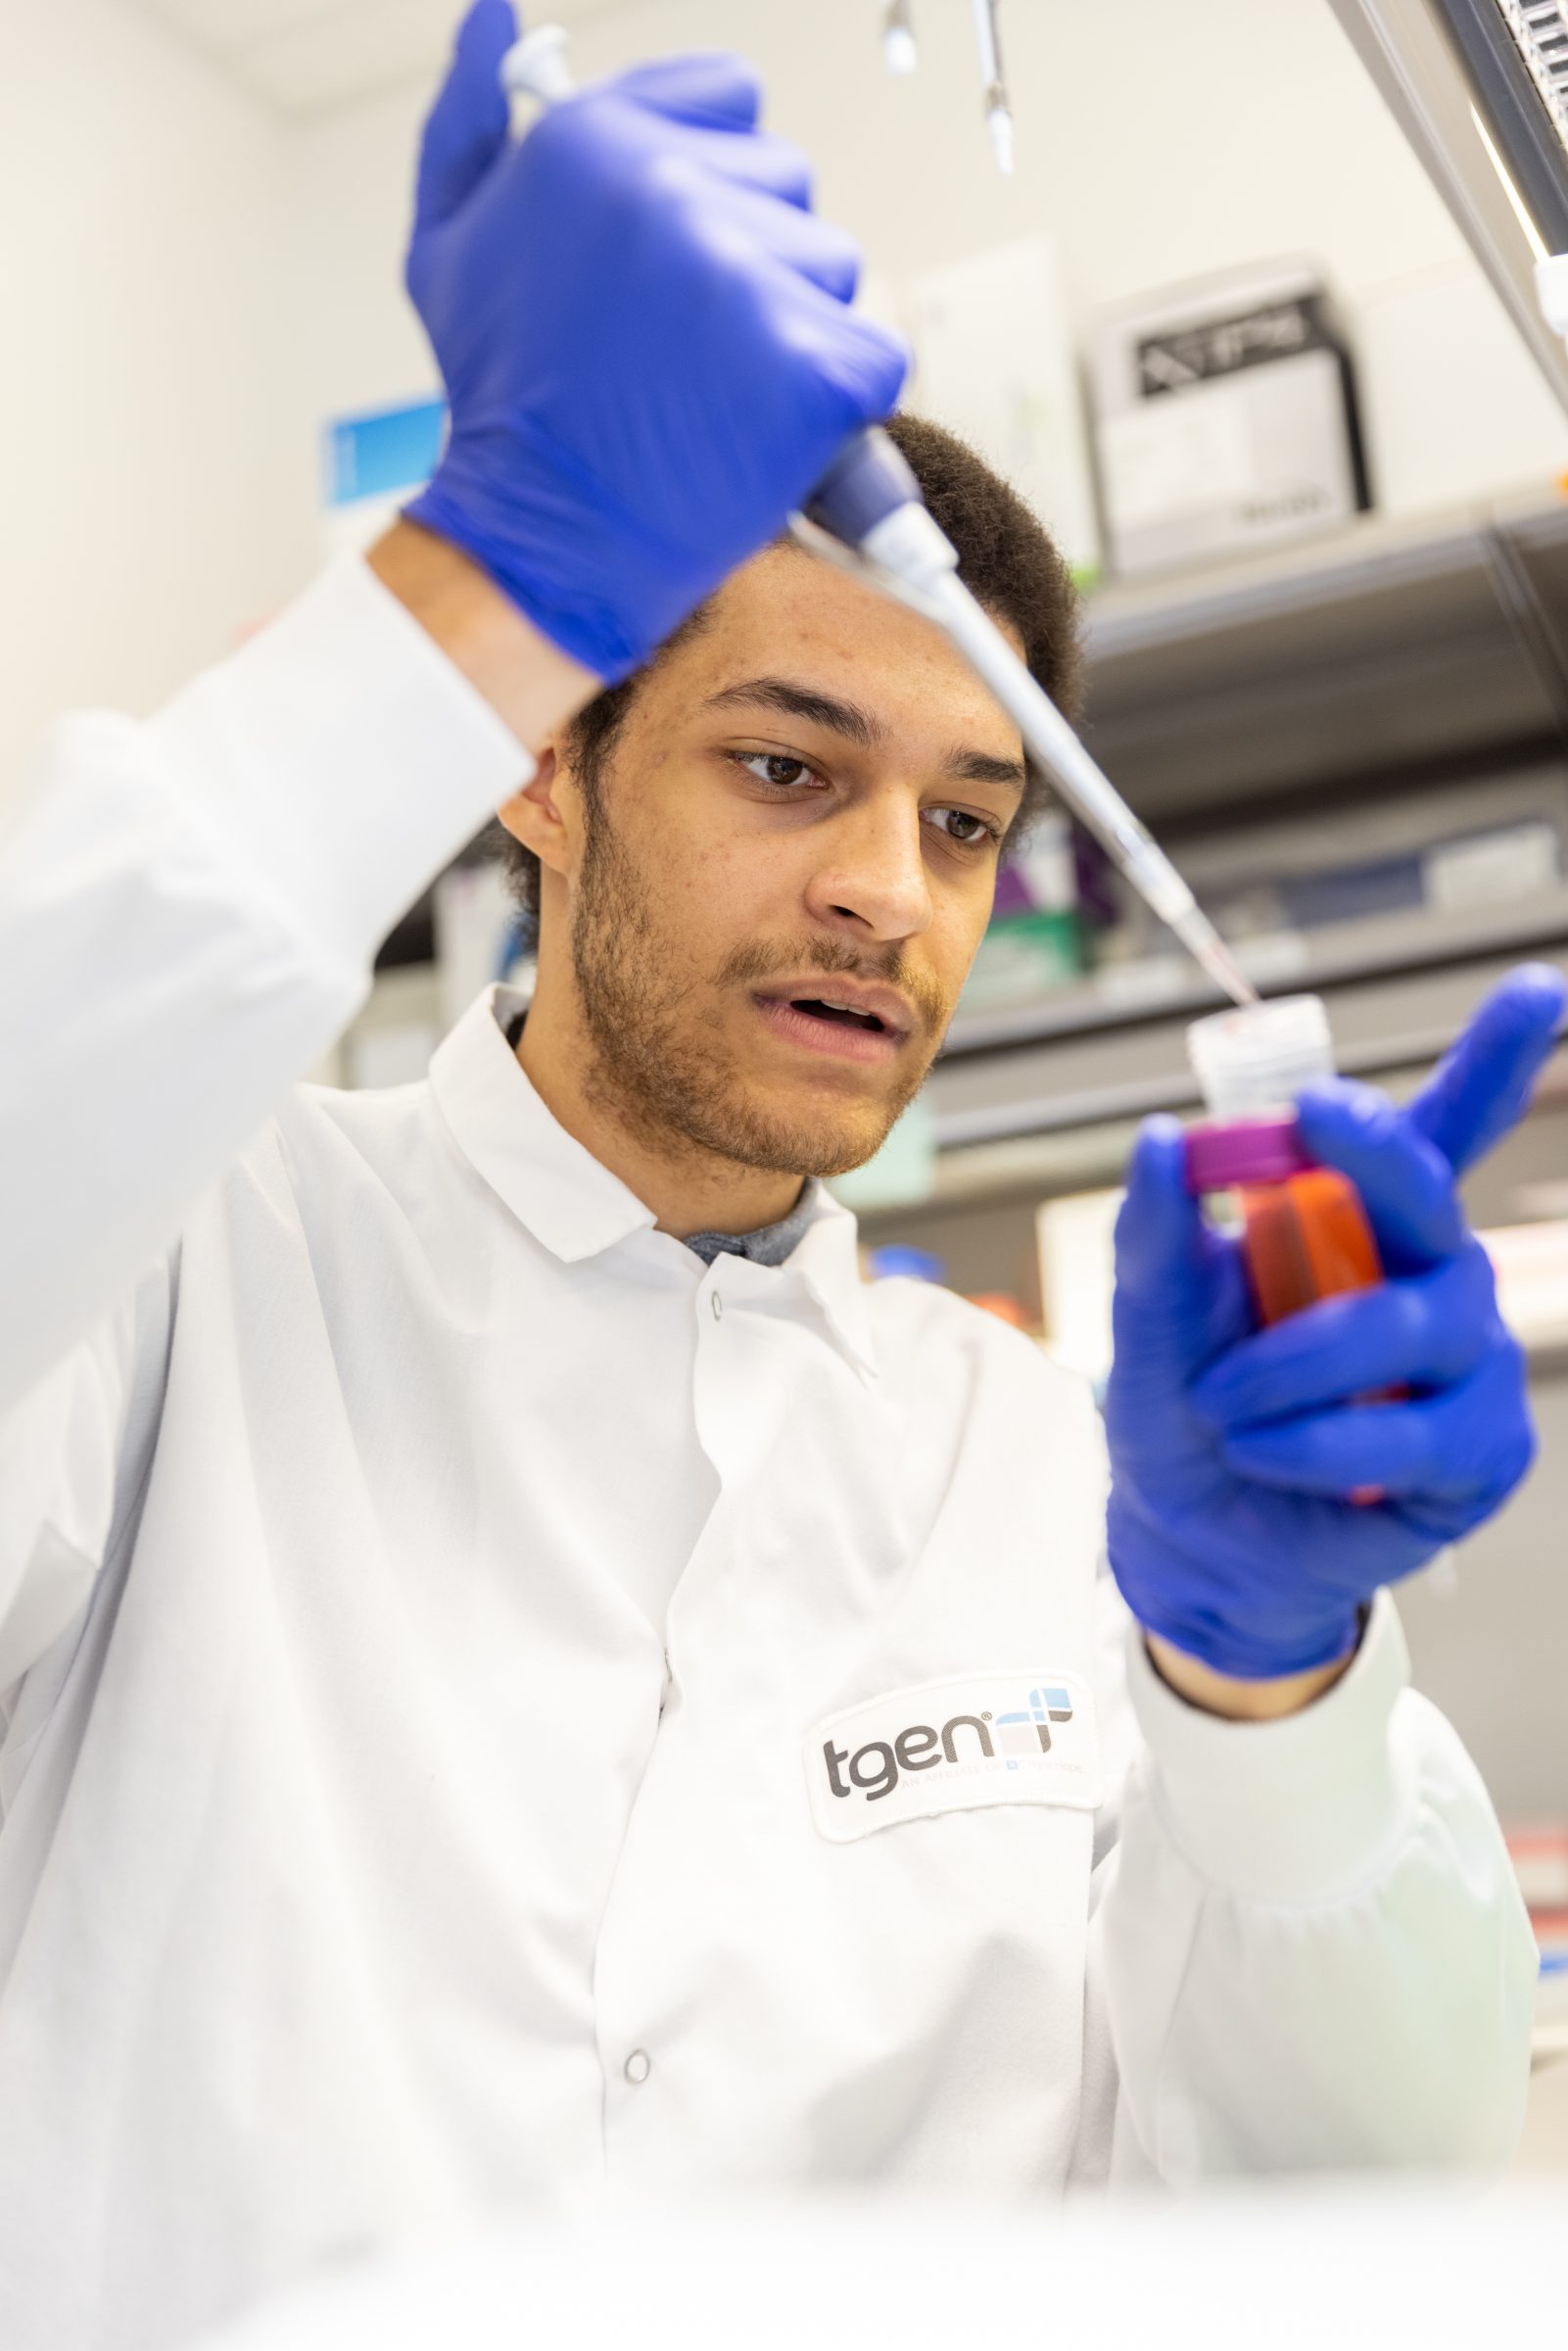 Student researcher George Testo works in the lab.